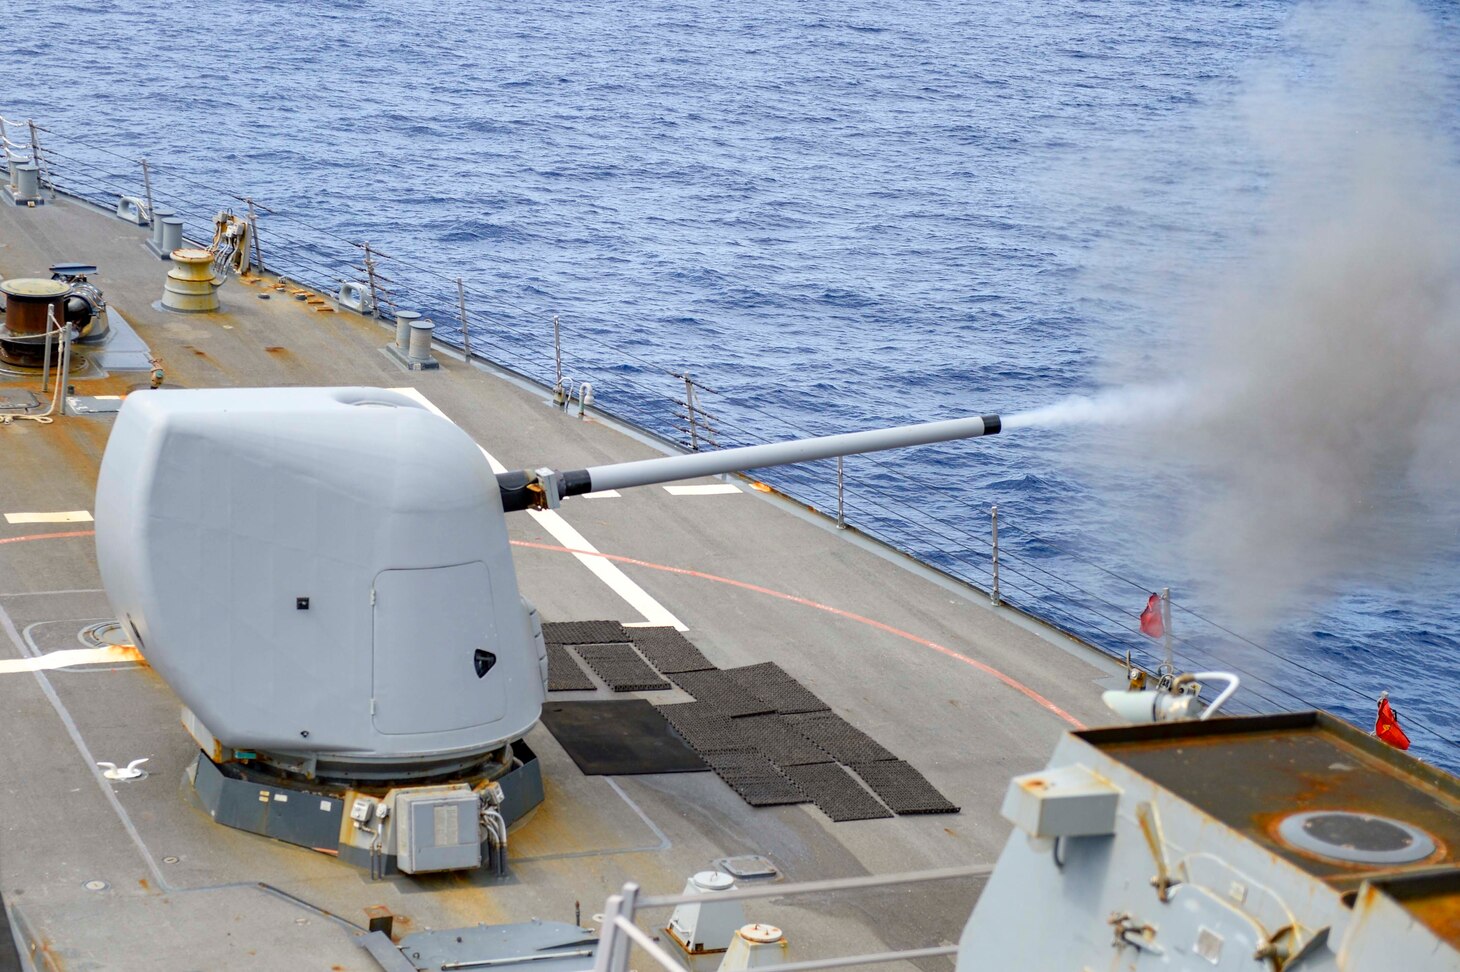 INDIAN OCEAN (March 12, 2021) The Arleigh Burke-class guided-missile destroyer USS Russell (DDG 59) fires its Mark 45 5-inch gun during a surface target exercise March 12, 2021. Russell, part of the Theodore Roosevelt Carrier Strike Group, is on a scheduled deployment to the U.S. 7th Fleet area of operations. As the U.S. Navy’s largest forward-deployed fleet, 7th Fleet routinely operates and interacts with 35 maritime nations while conducting missions to preserve and protect a free and open Indo-Pacific. (U.S. Navy photo by Mass Communication Specialist 3rd Class Wade Costin)